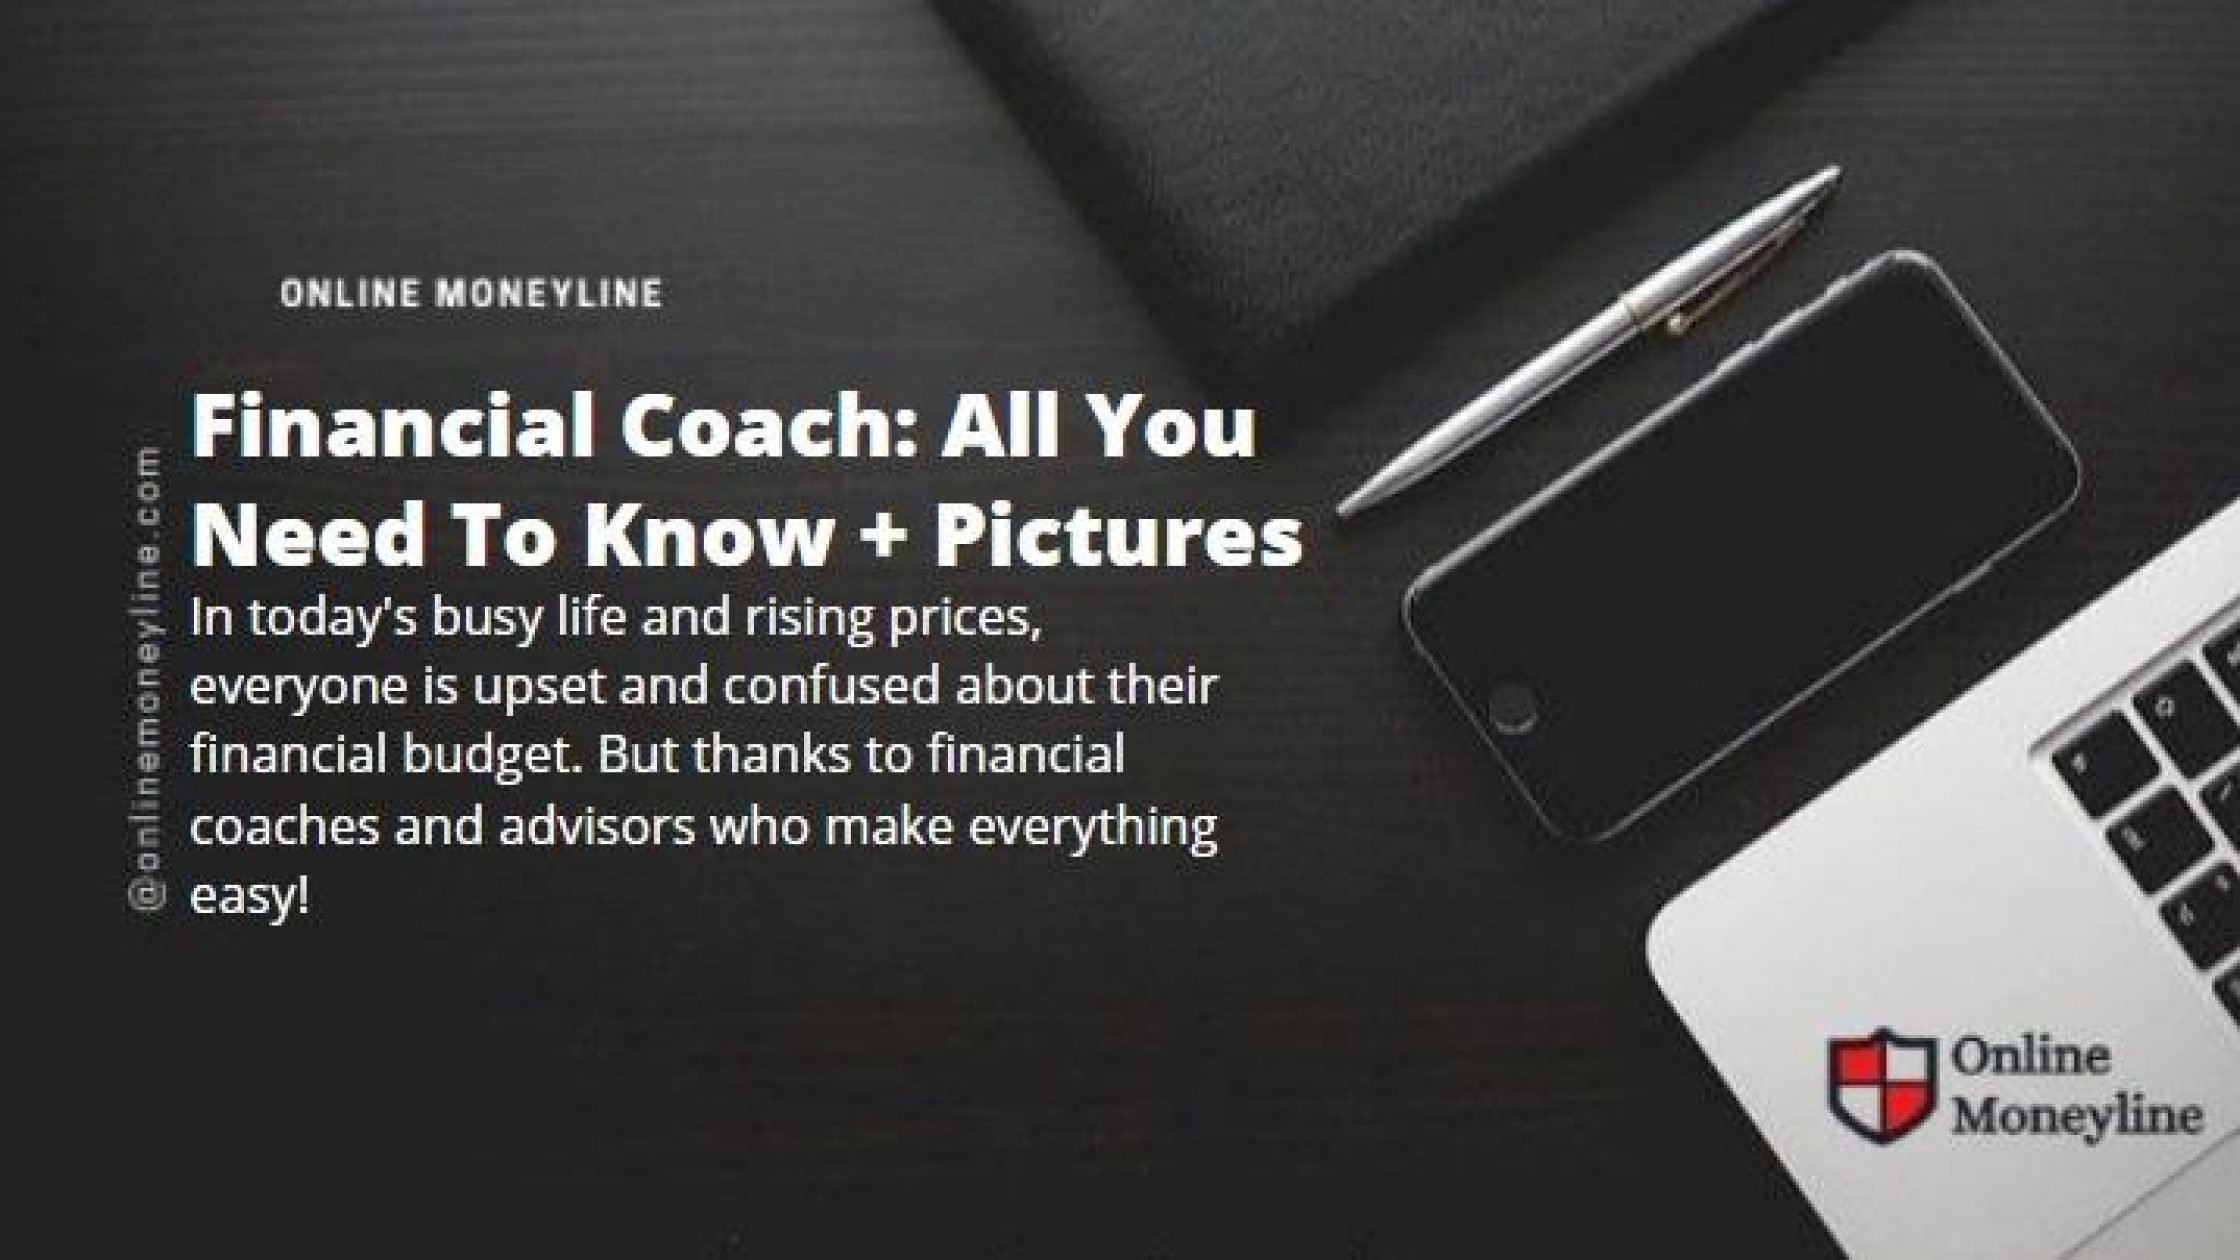 Financial Coach: All You Need To Know + Pictures